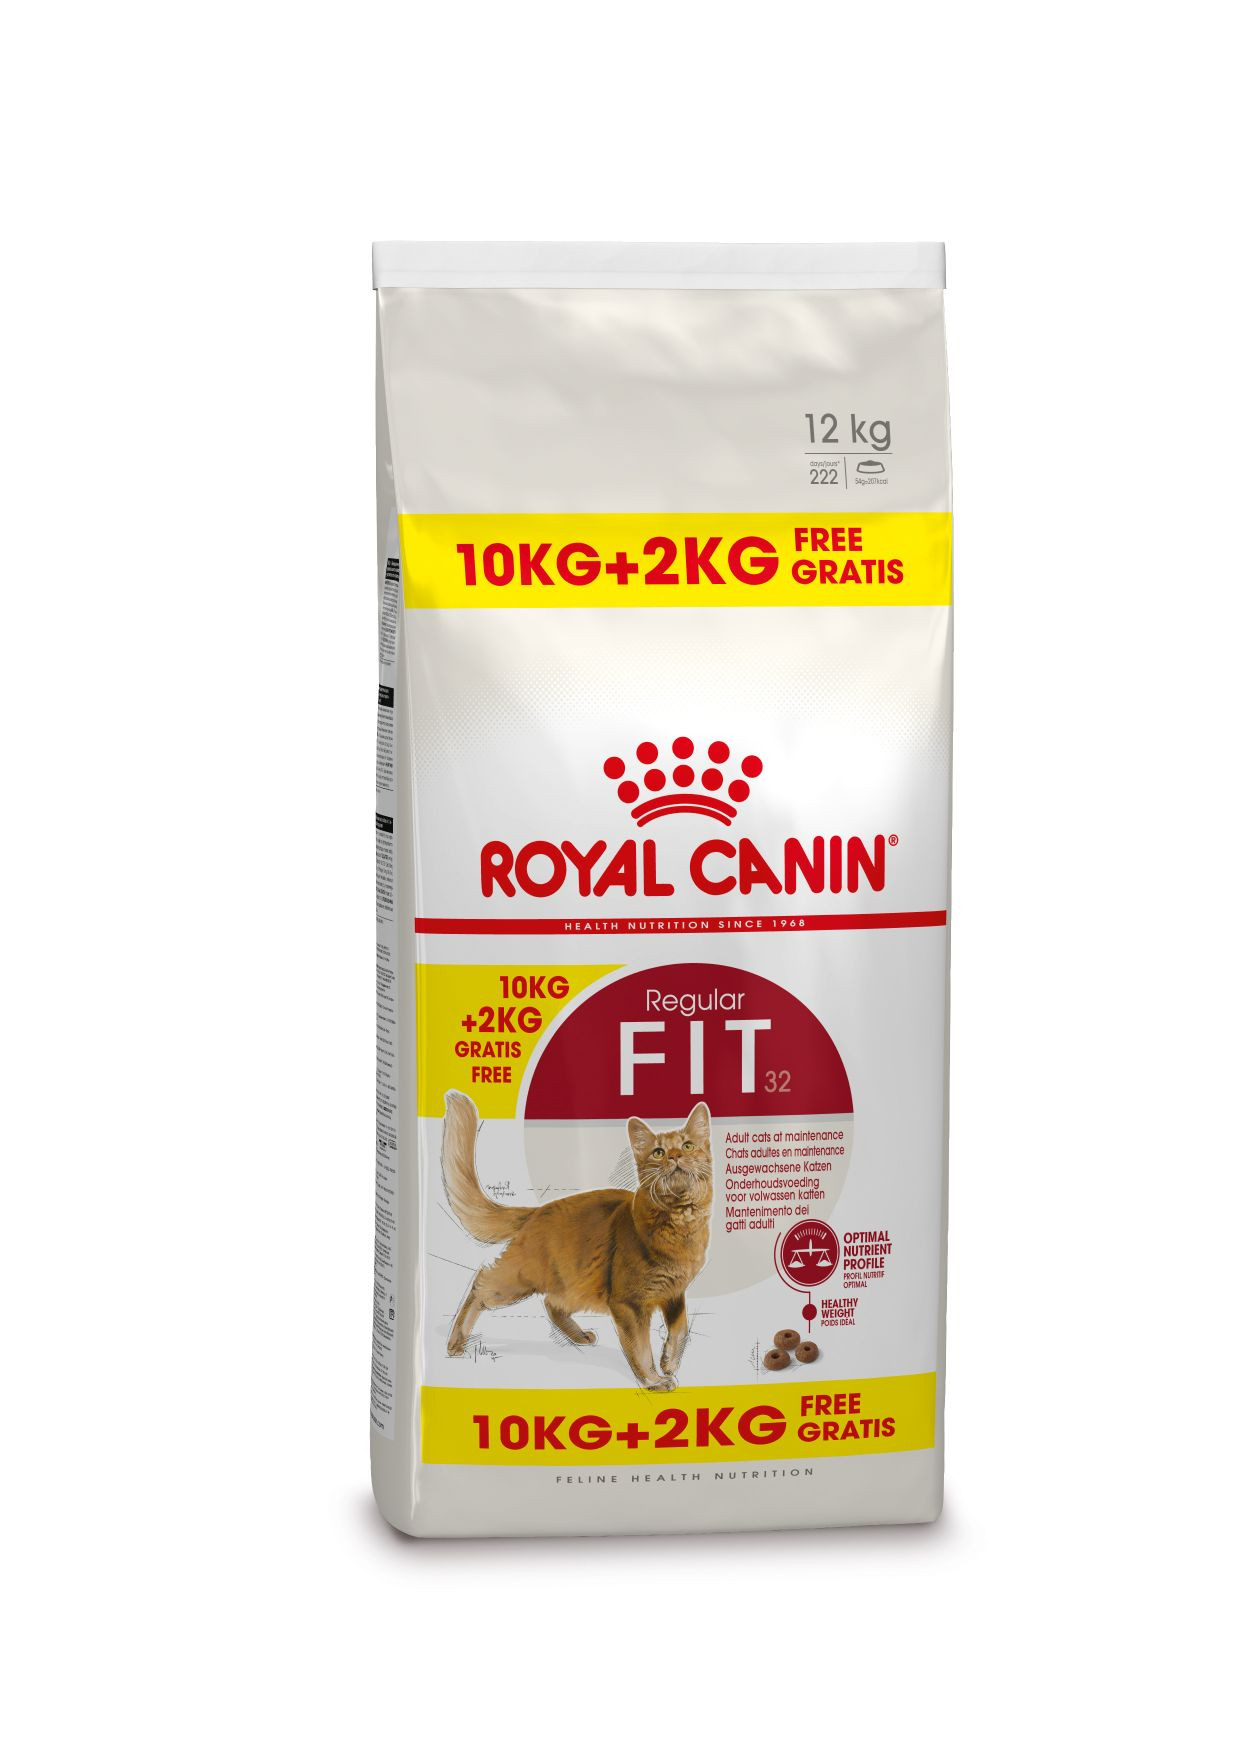 Royal Canin Fit 32 Gatto